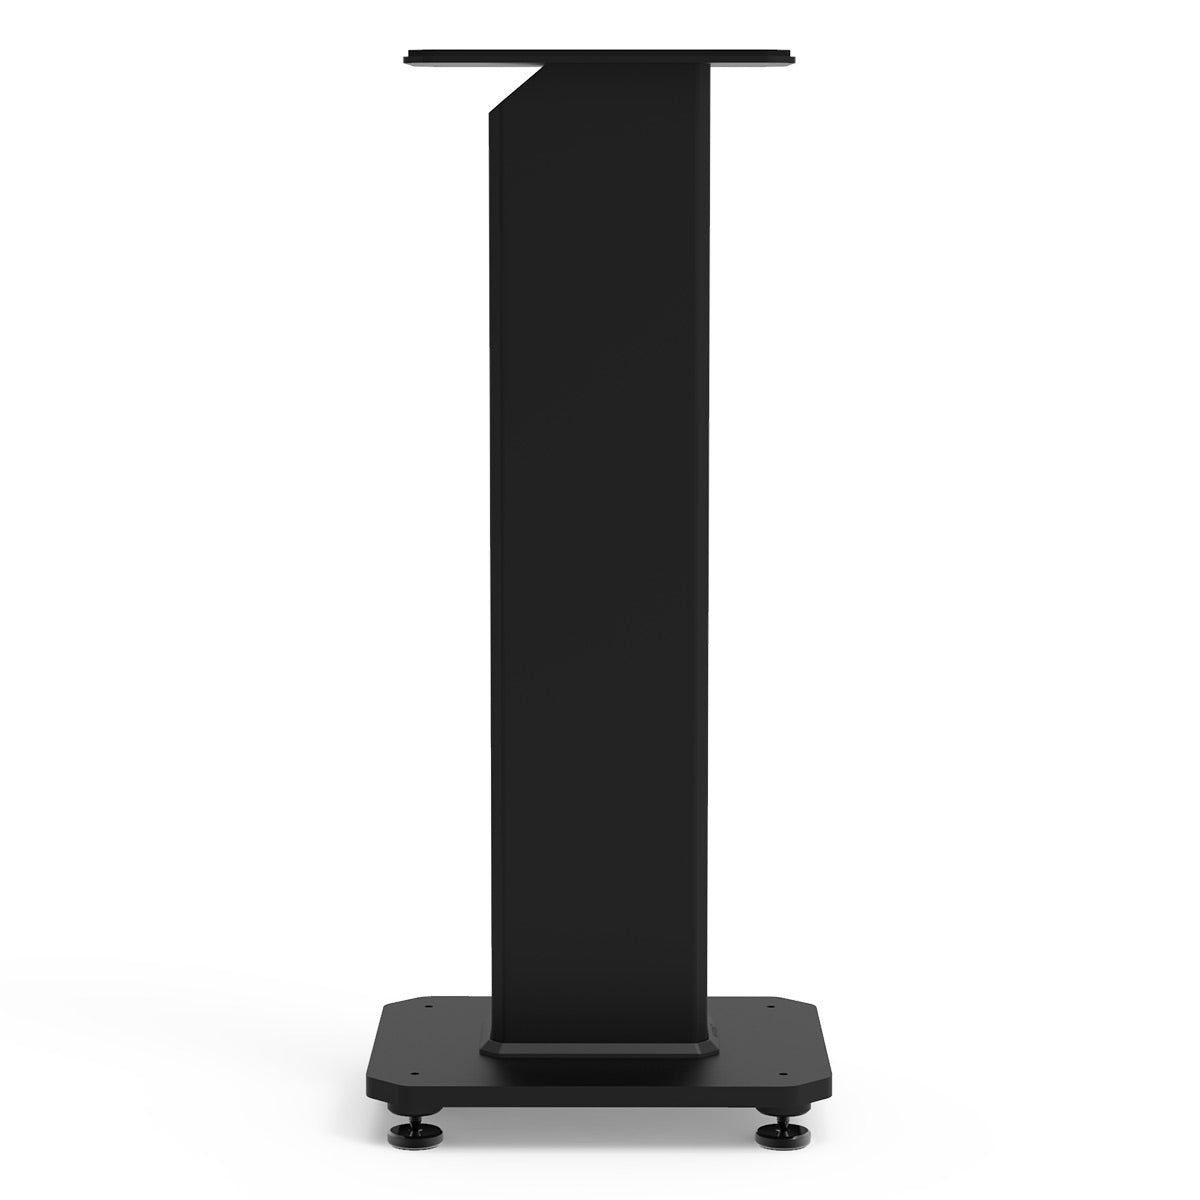 Kanto SX26 26" Tall Fillable Speaker Stands with Isolation Feet - Pair (Black)